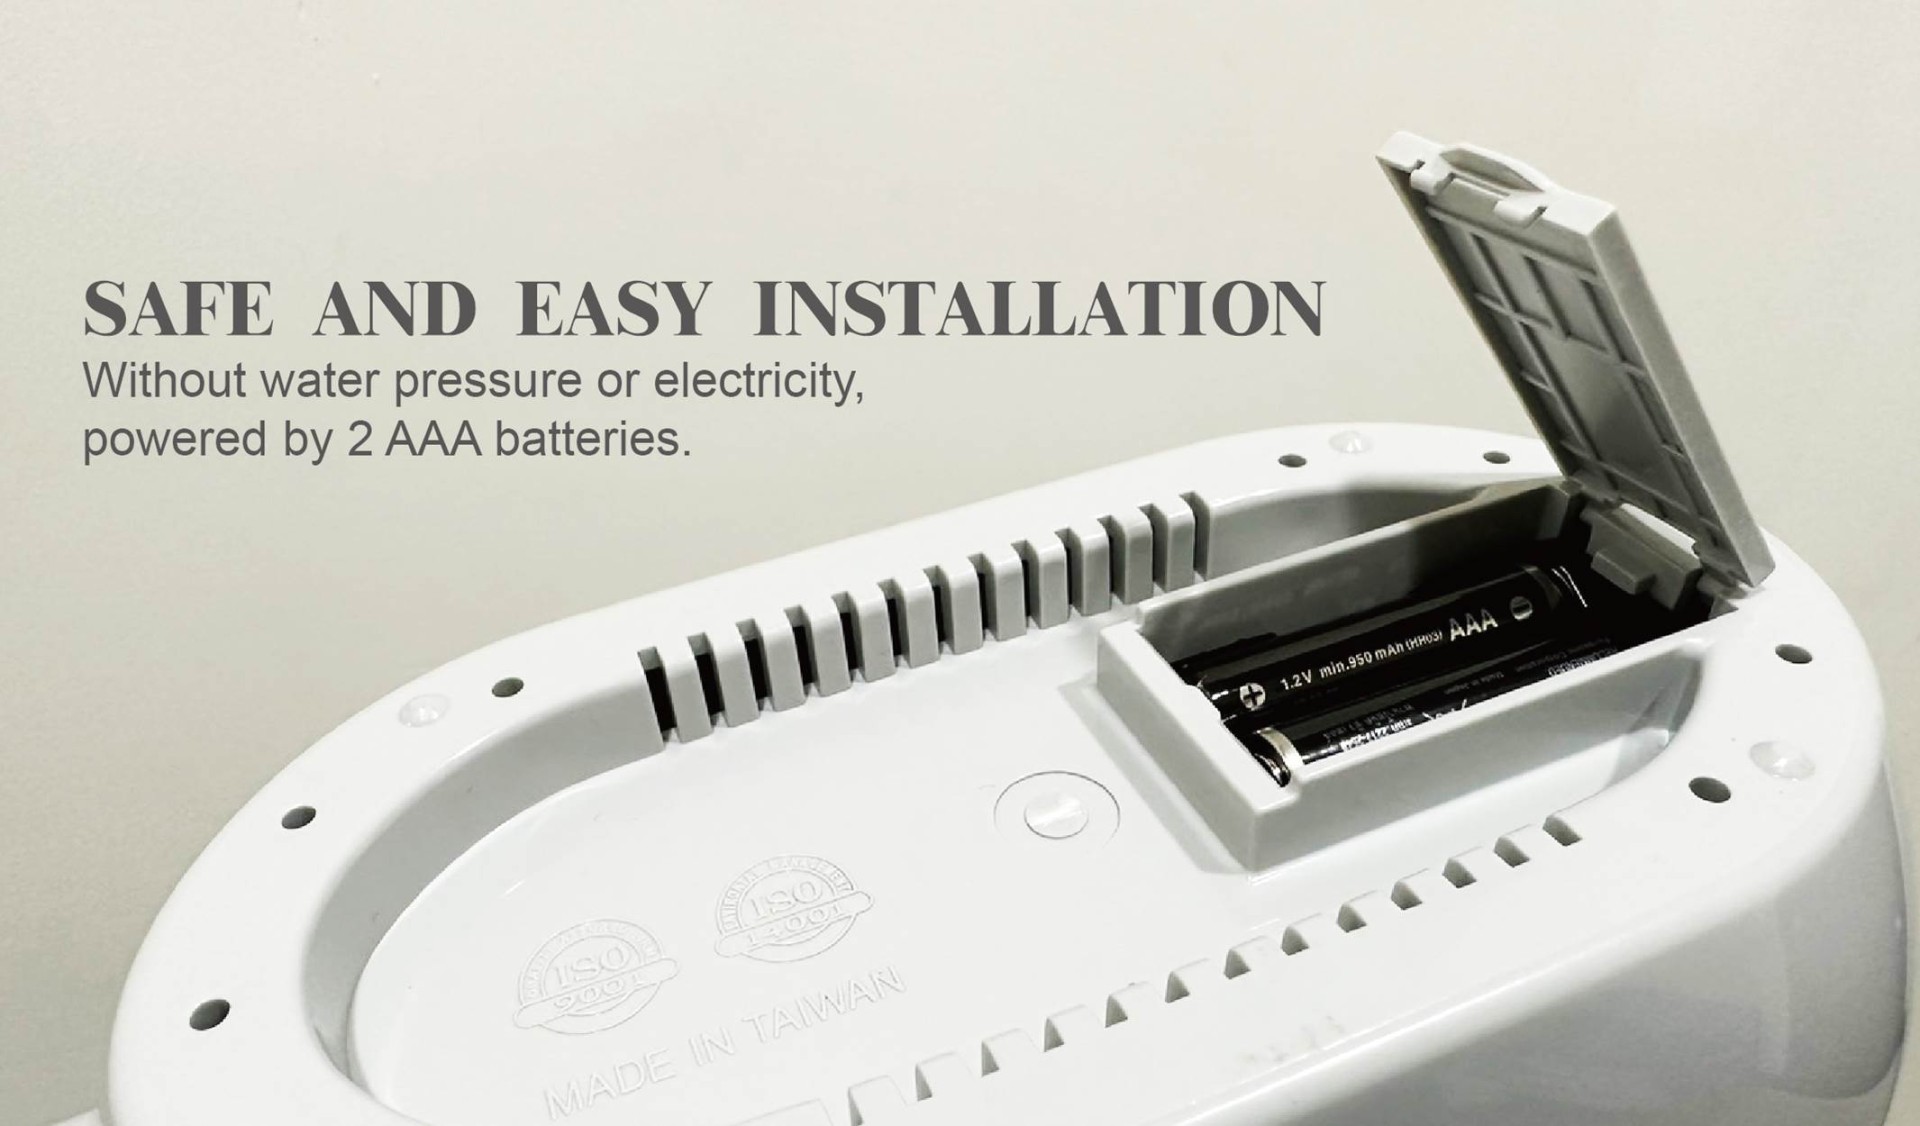 Safe and easy installation